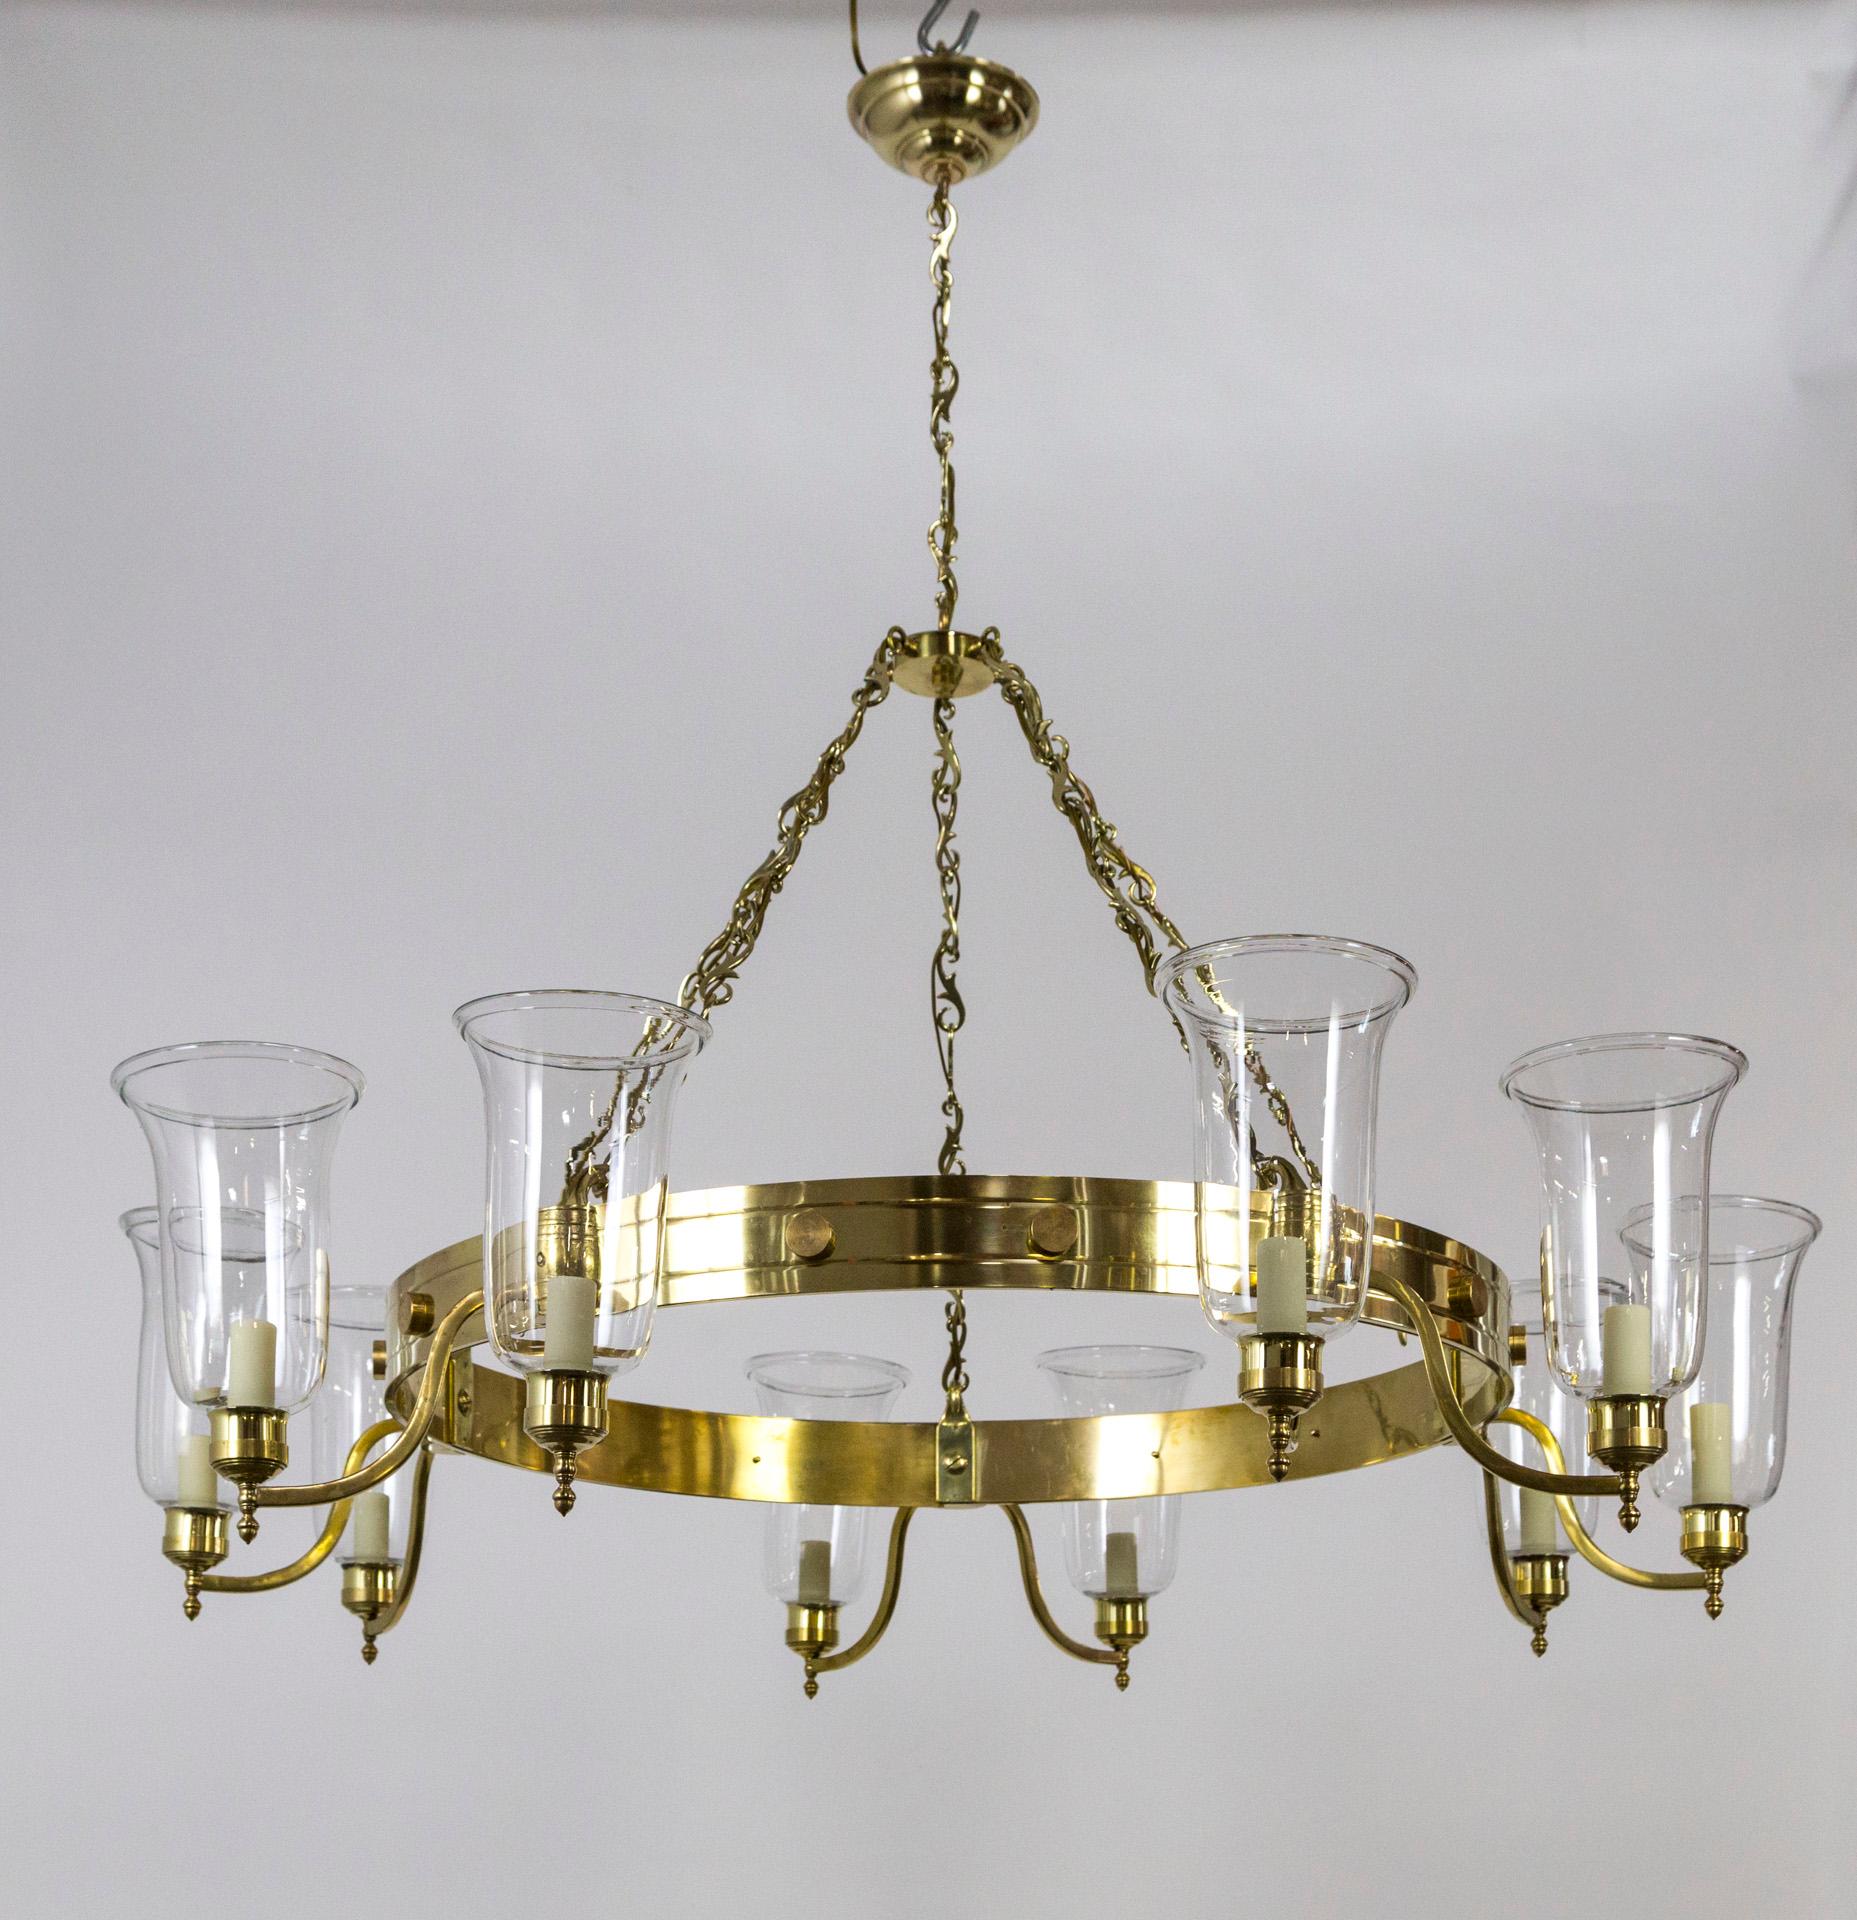 A massive, quality crafted, solid brass chandelier with fine, hurricane glass shades. Individually crafted undulating arms with barrel accents. The raw brass will patina beautifully. Measure: 48.5